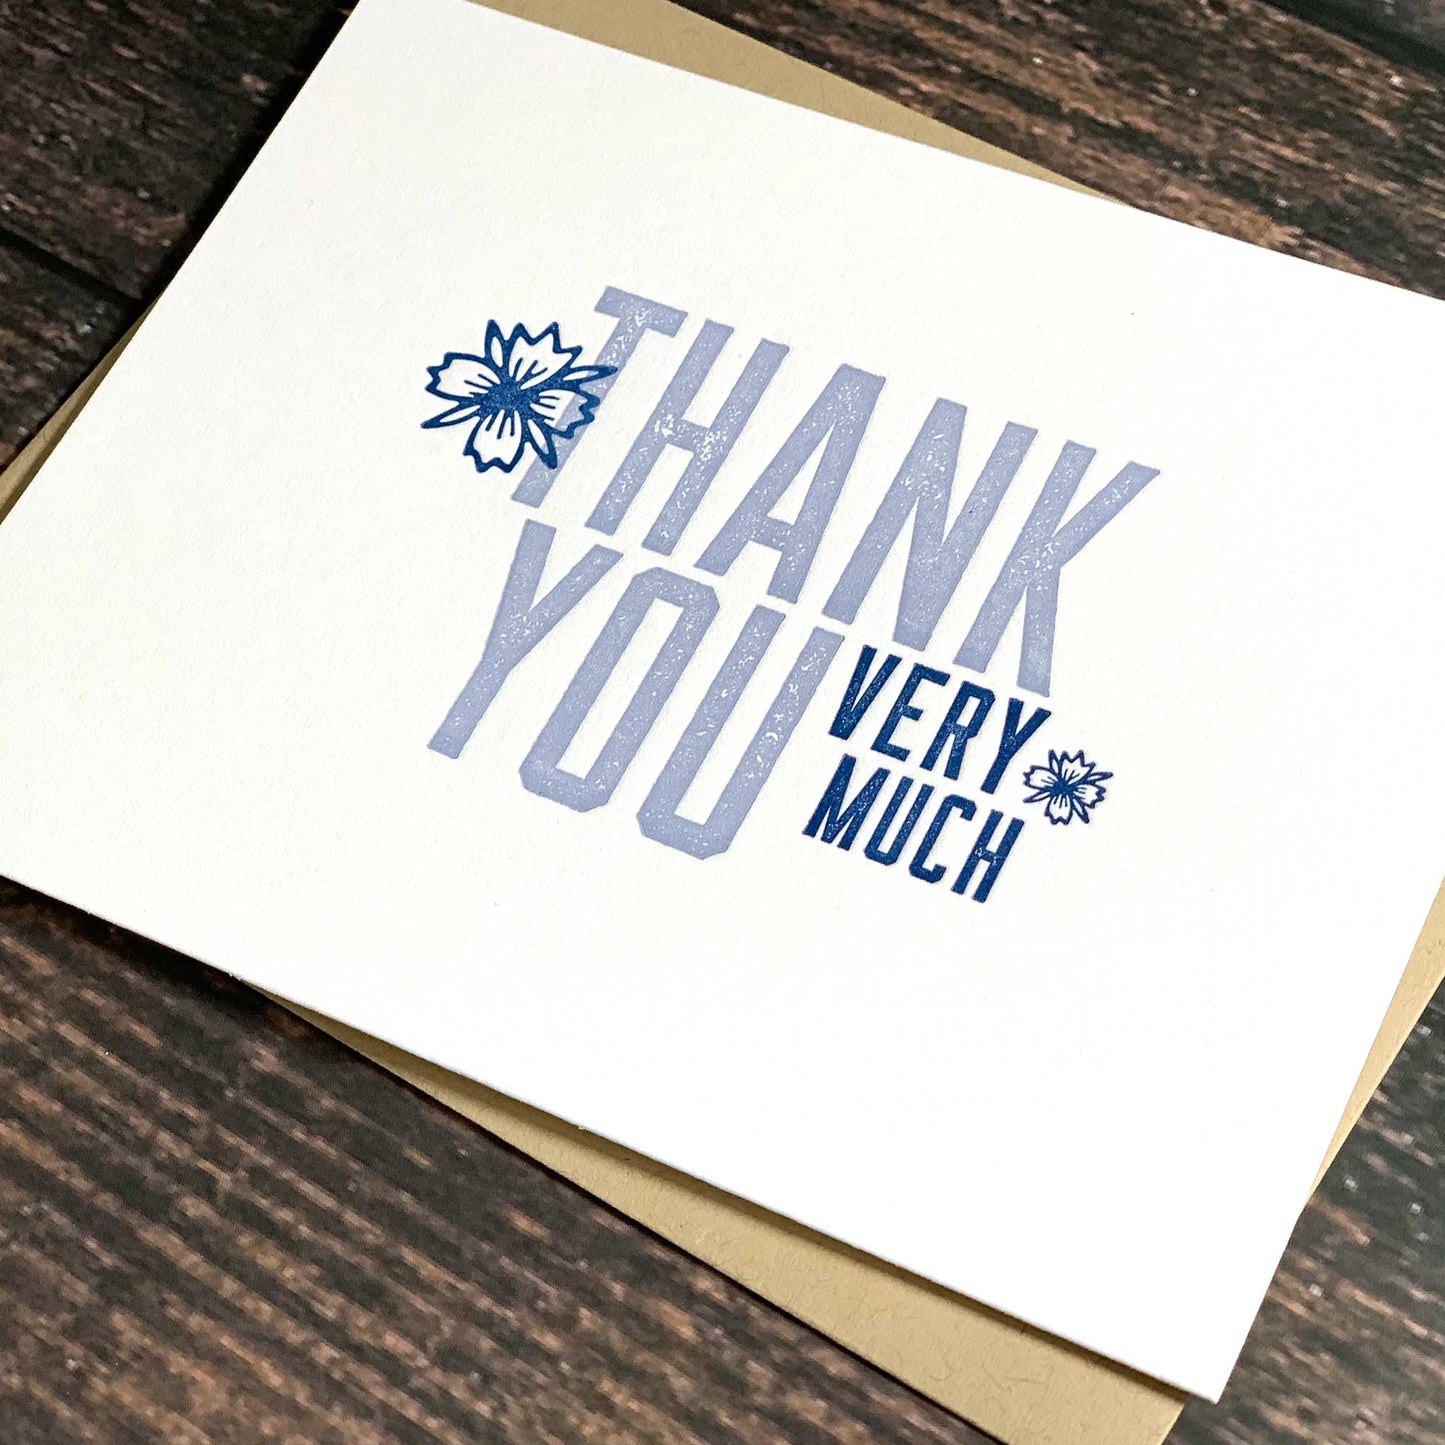 Thank you very much cards, thank you notes, Letterpress printed, view shows letterpress impression, includes envelope